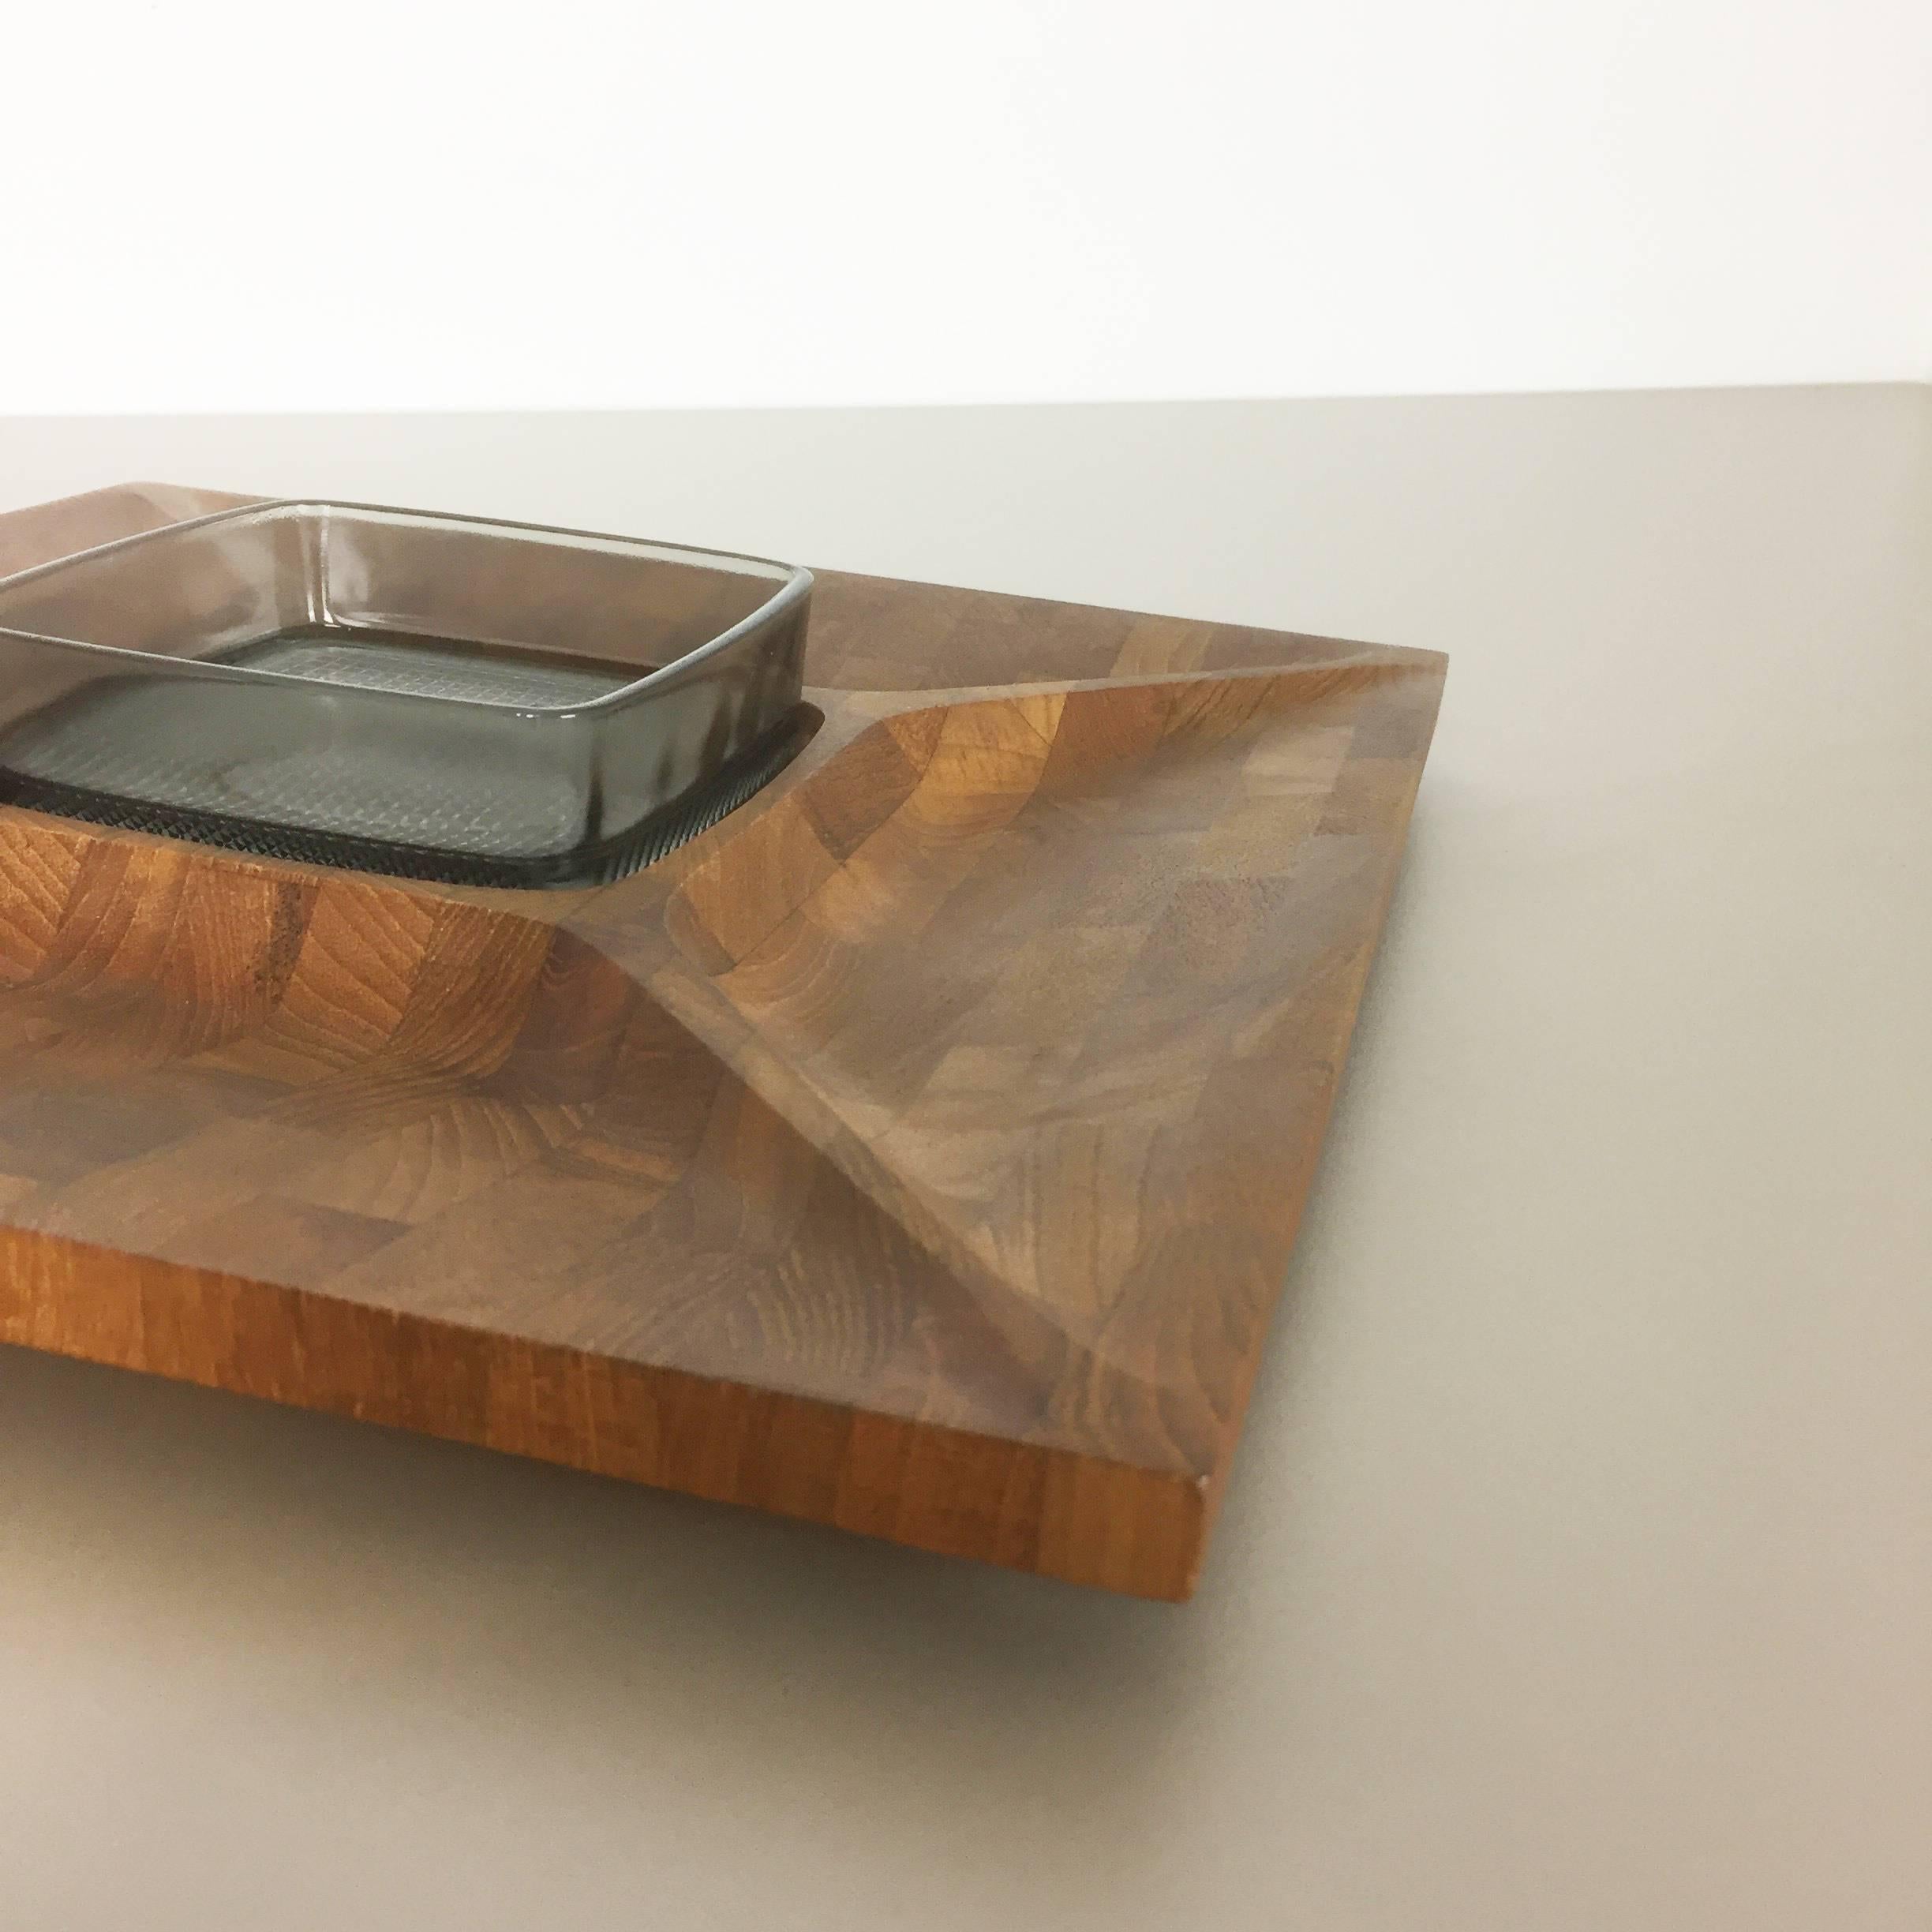 20th Century Danish Shell Bowl in Solid Teak Wood, by Digsmed Made in Denmark, 1960s